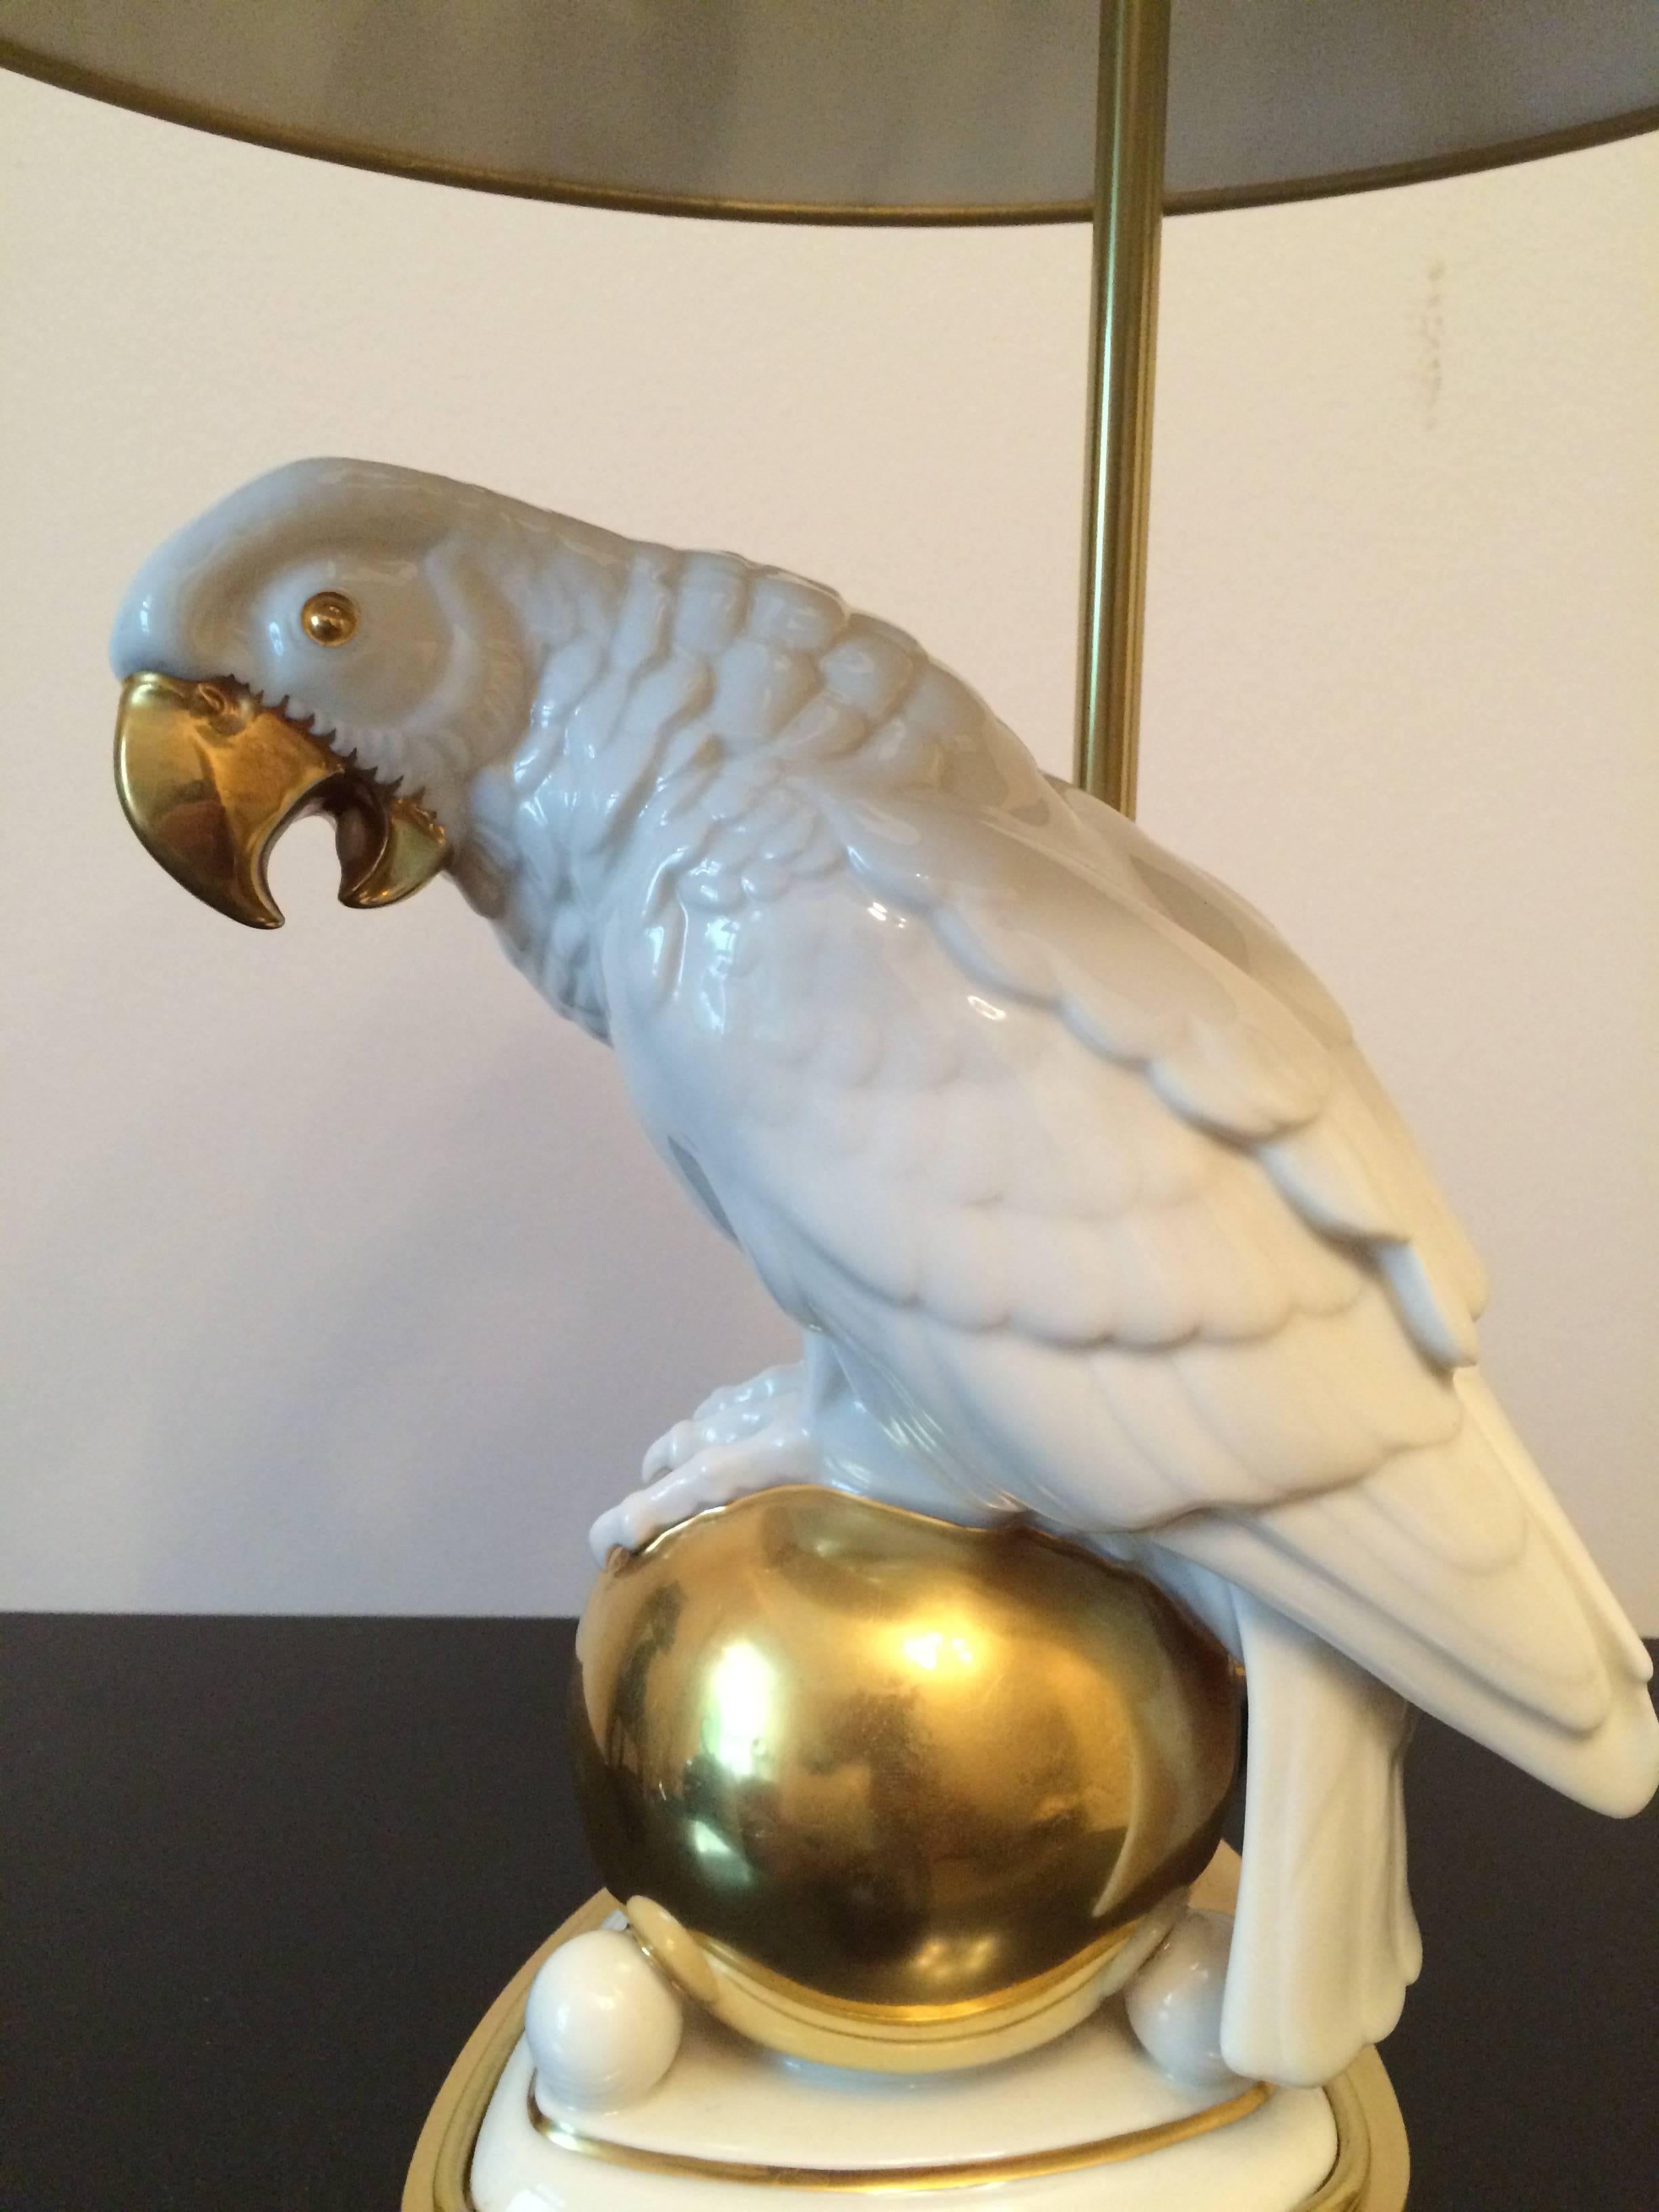 Porcelain parrot on a golden globe mounted as a table lamp on a brass base.
Hutschenreuther porcelain design by Fritz Klee.
 